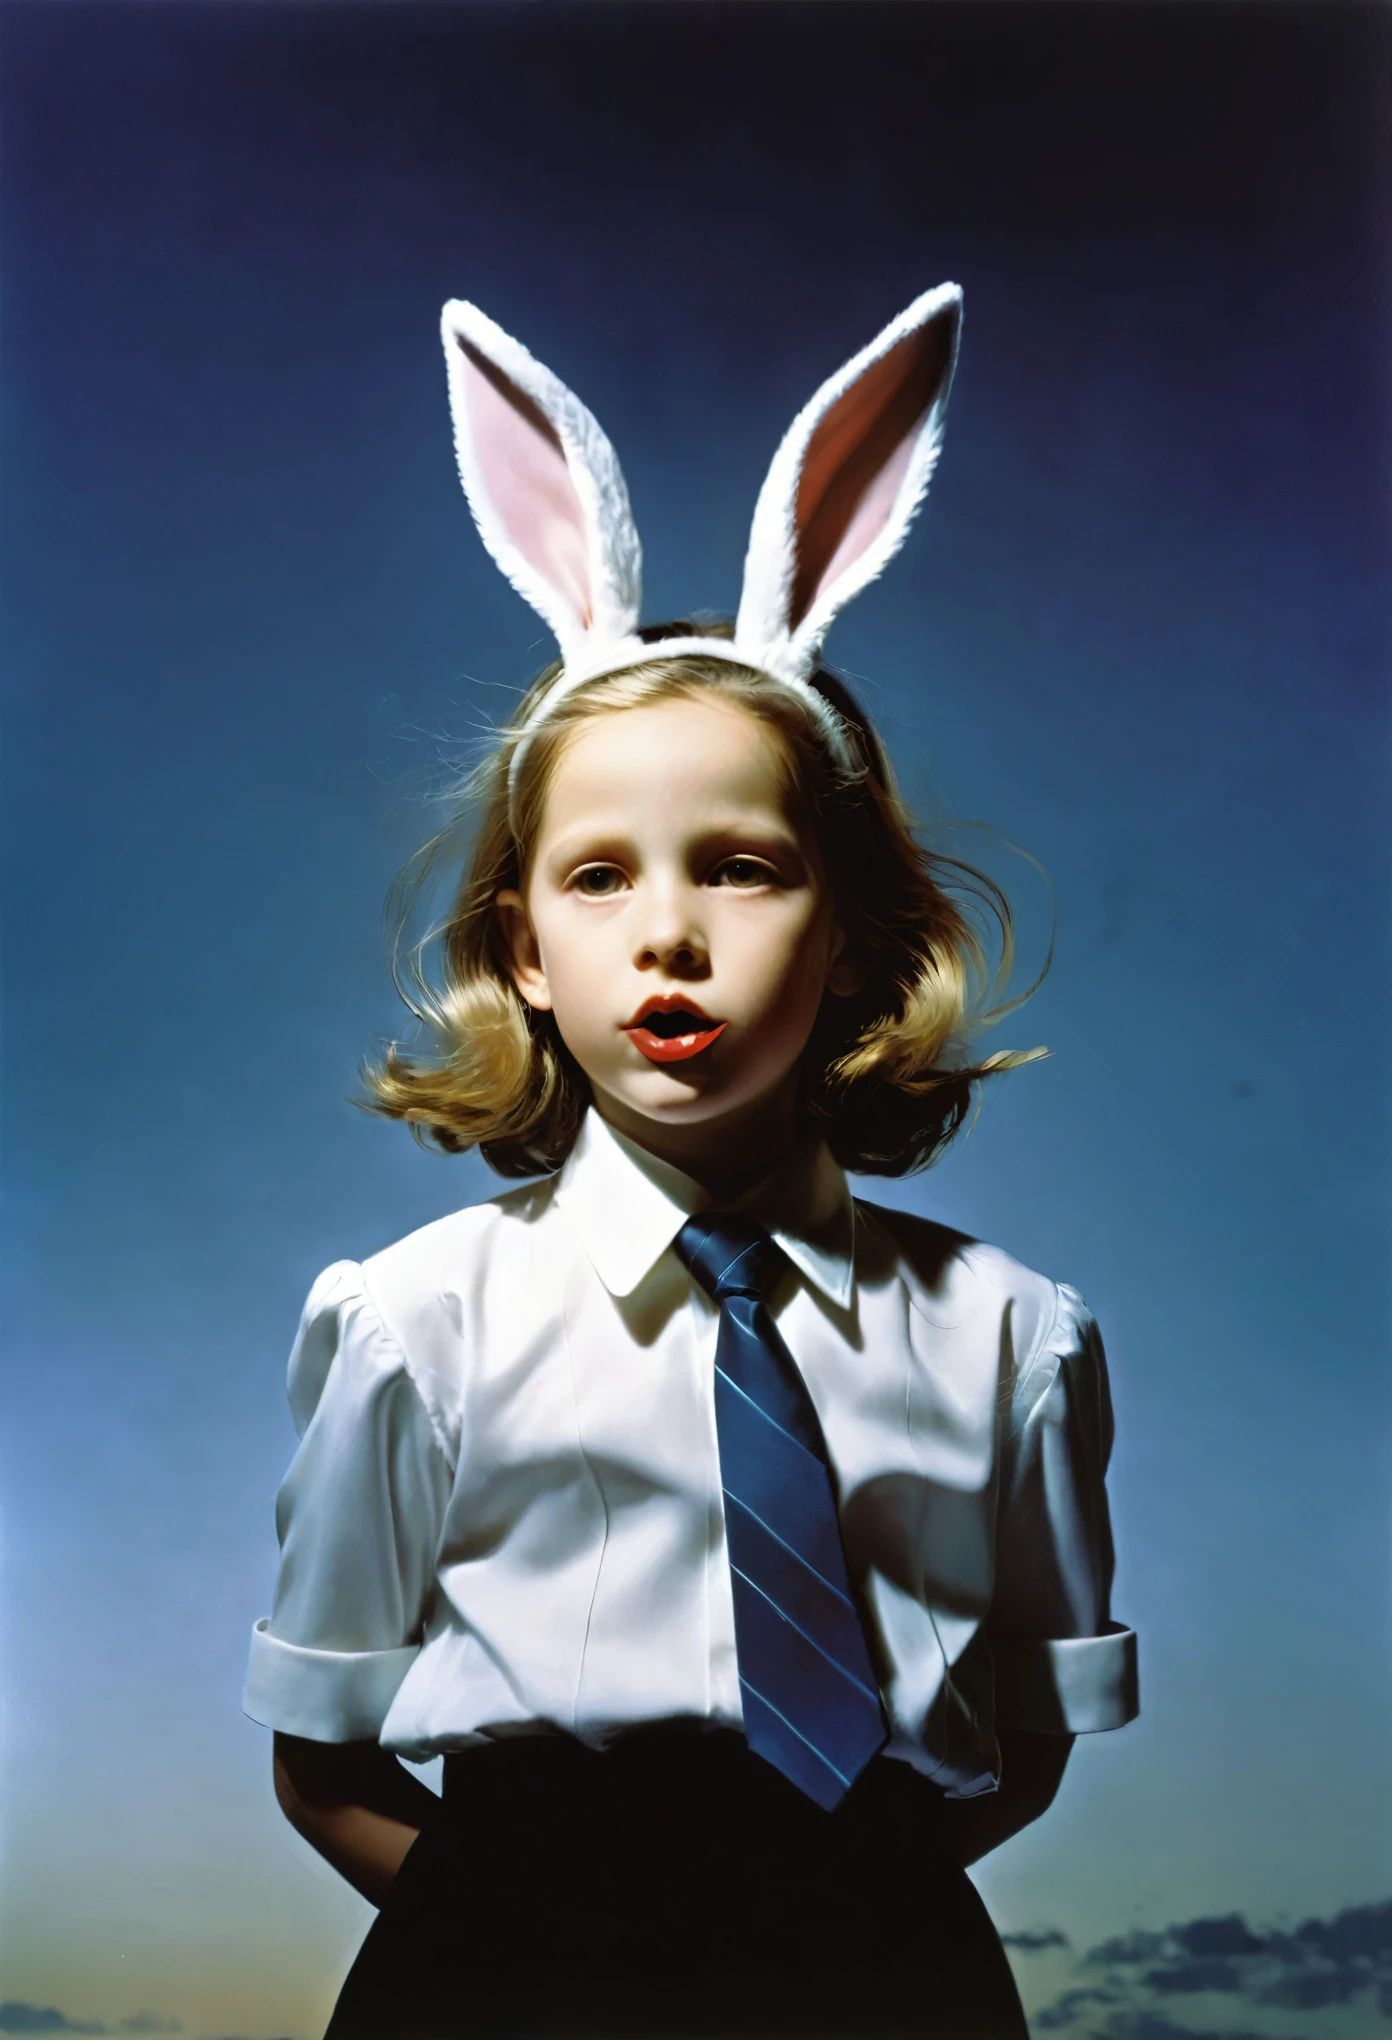 rabbit girl by gottfried helnwein and dali, We snuff out beauty with our thoughts, a basic movement captured a moment of release, minimalist, then it got sealed and forgotten, it screamed unto nature, expressionist photograph, surreal and weird take, unknowable as ever, the childhood's halo stretches like an horizon then comes around like a necktie, the filter chokes